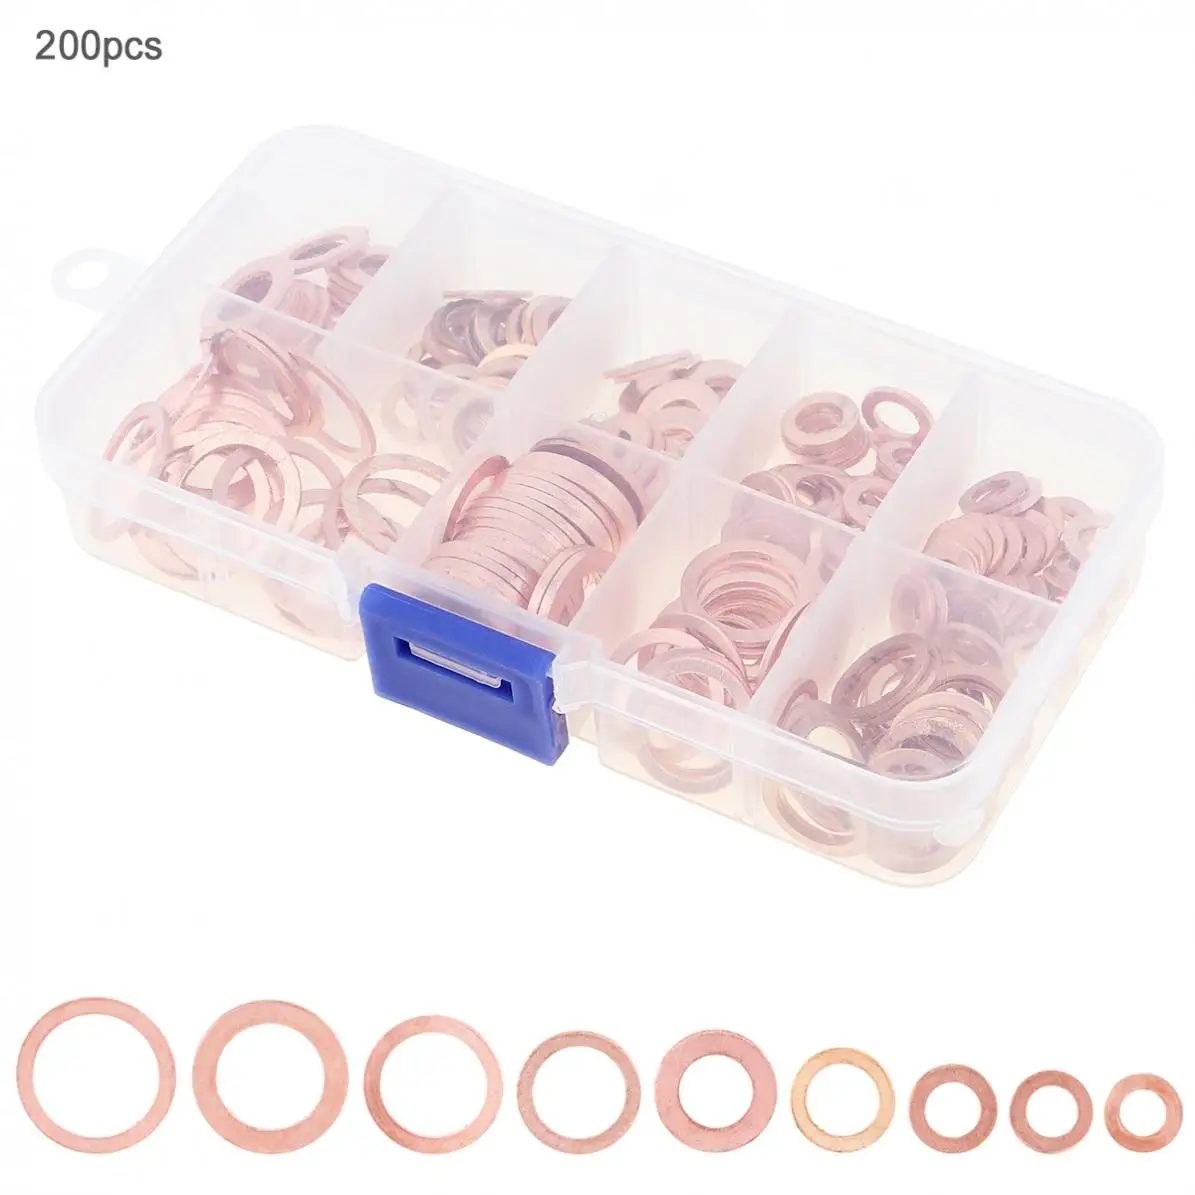 

200pcs Solid Copper Washer Flat Ring Gasket Sump Plug Oil Seal Fittings M5 M6 M8 M10 M12 M14 Washers Fastener for Power Field